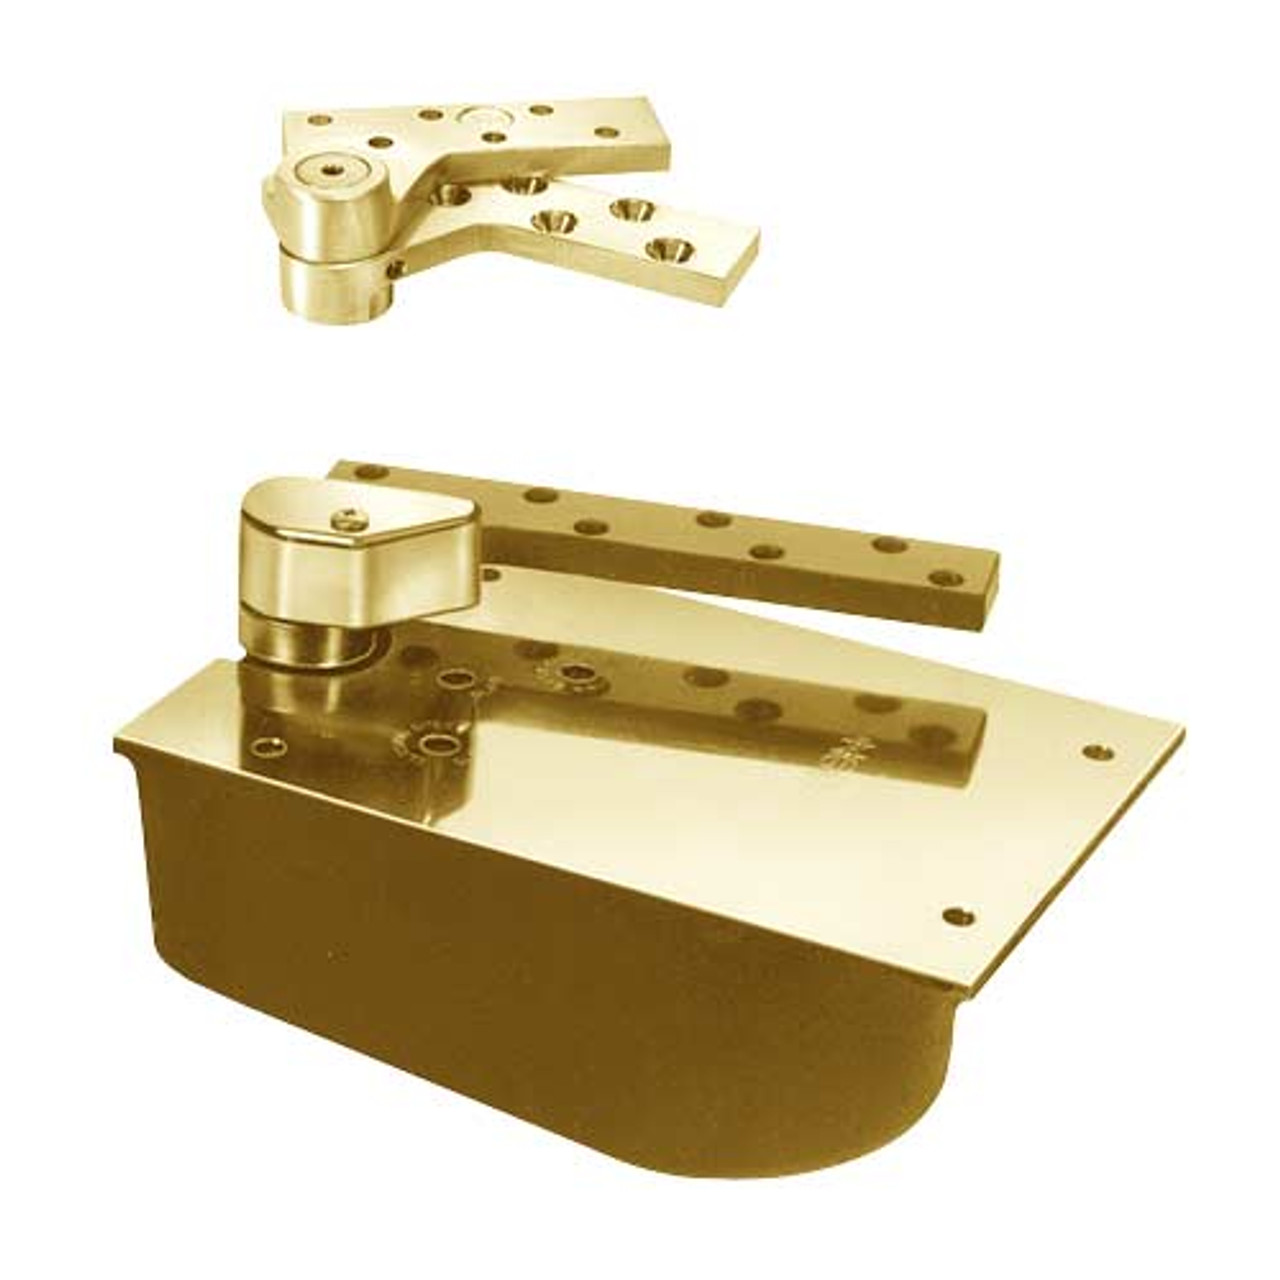 L27-85N-LTP-LH-2-1/2-605 Rixson 27 Series Extra Heavy Duty Lead Lined Offset Floor Closer in Bright Brass Finish